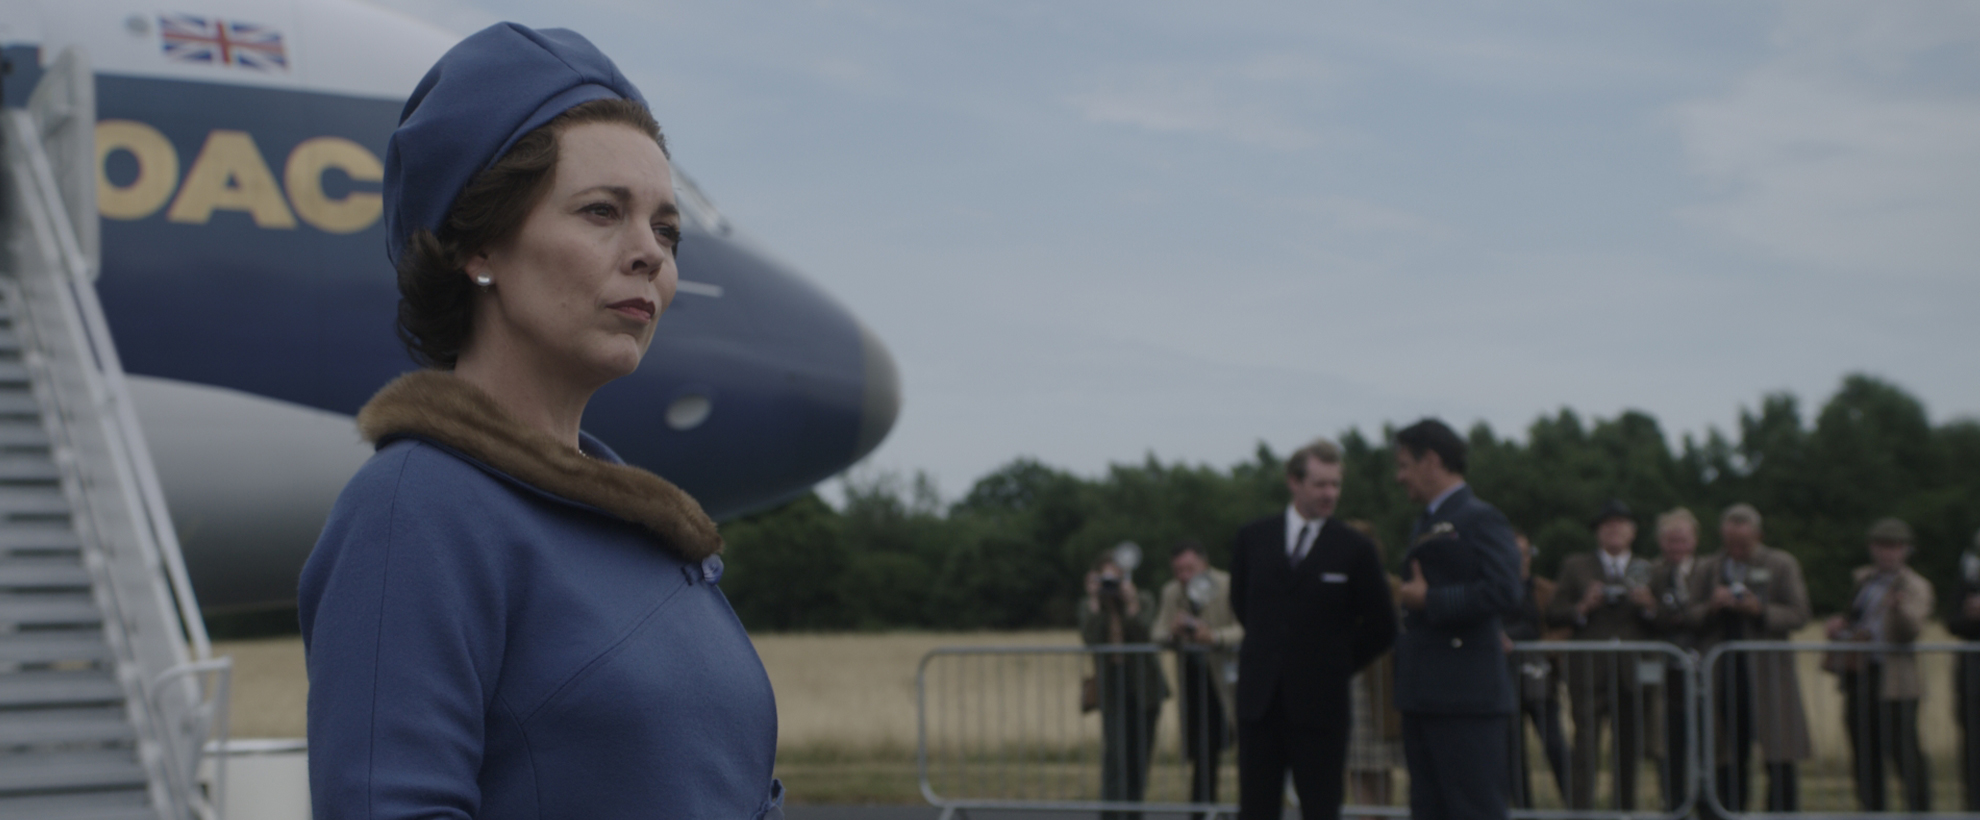 Olivia Colman as Queen Elizabeth the second, stepping off a plane in a 1960's setting and outfit